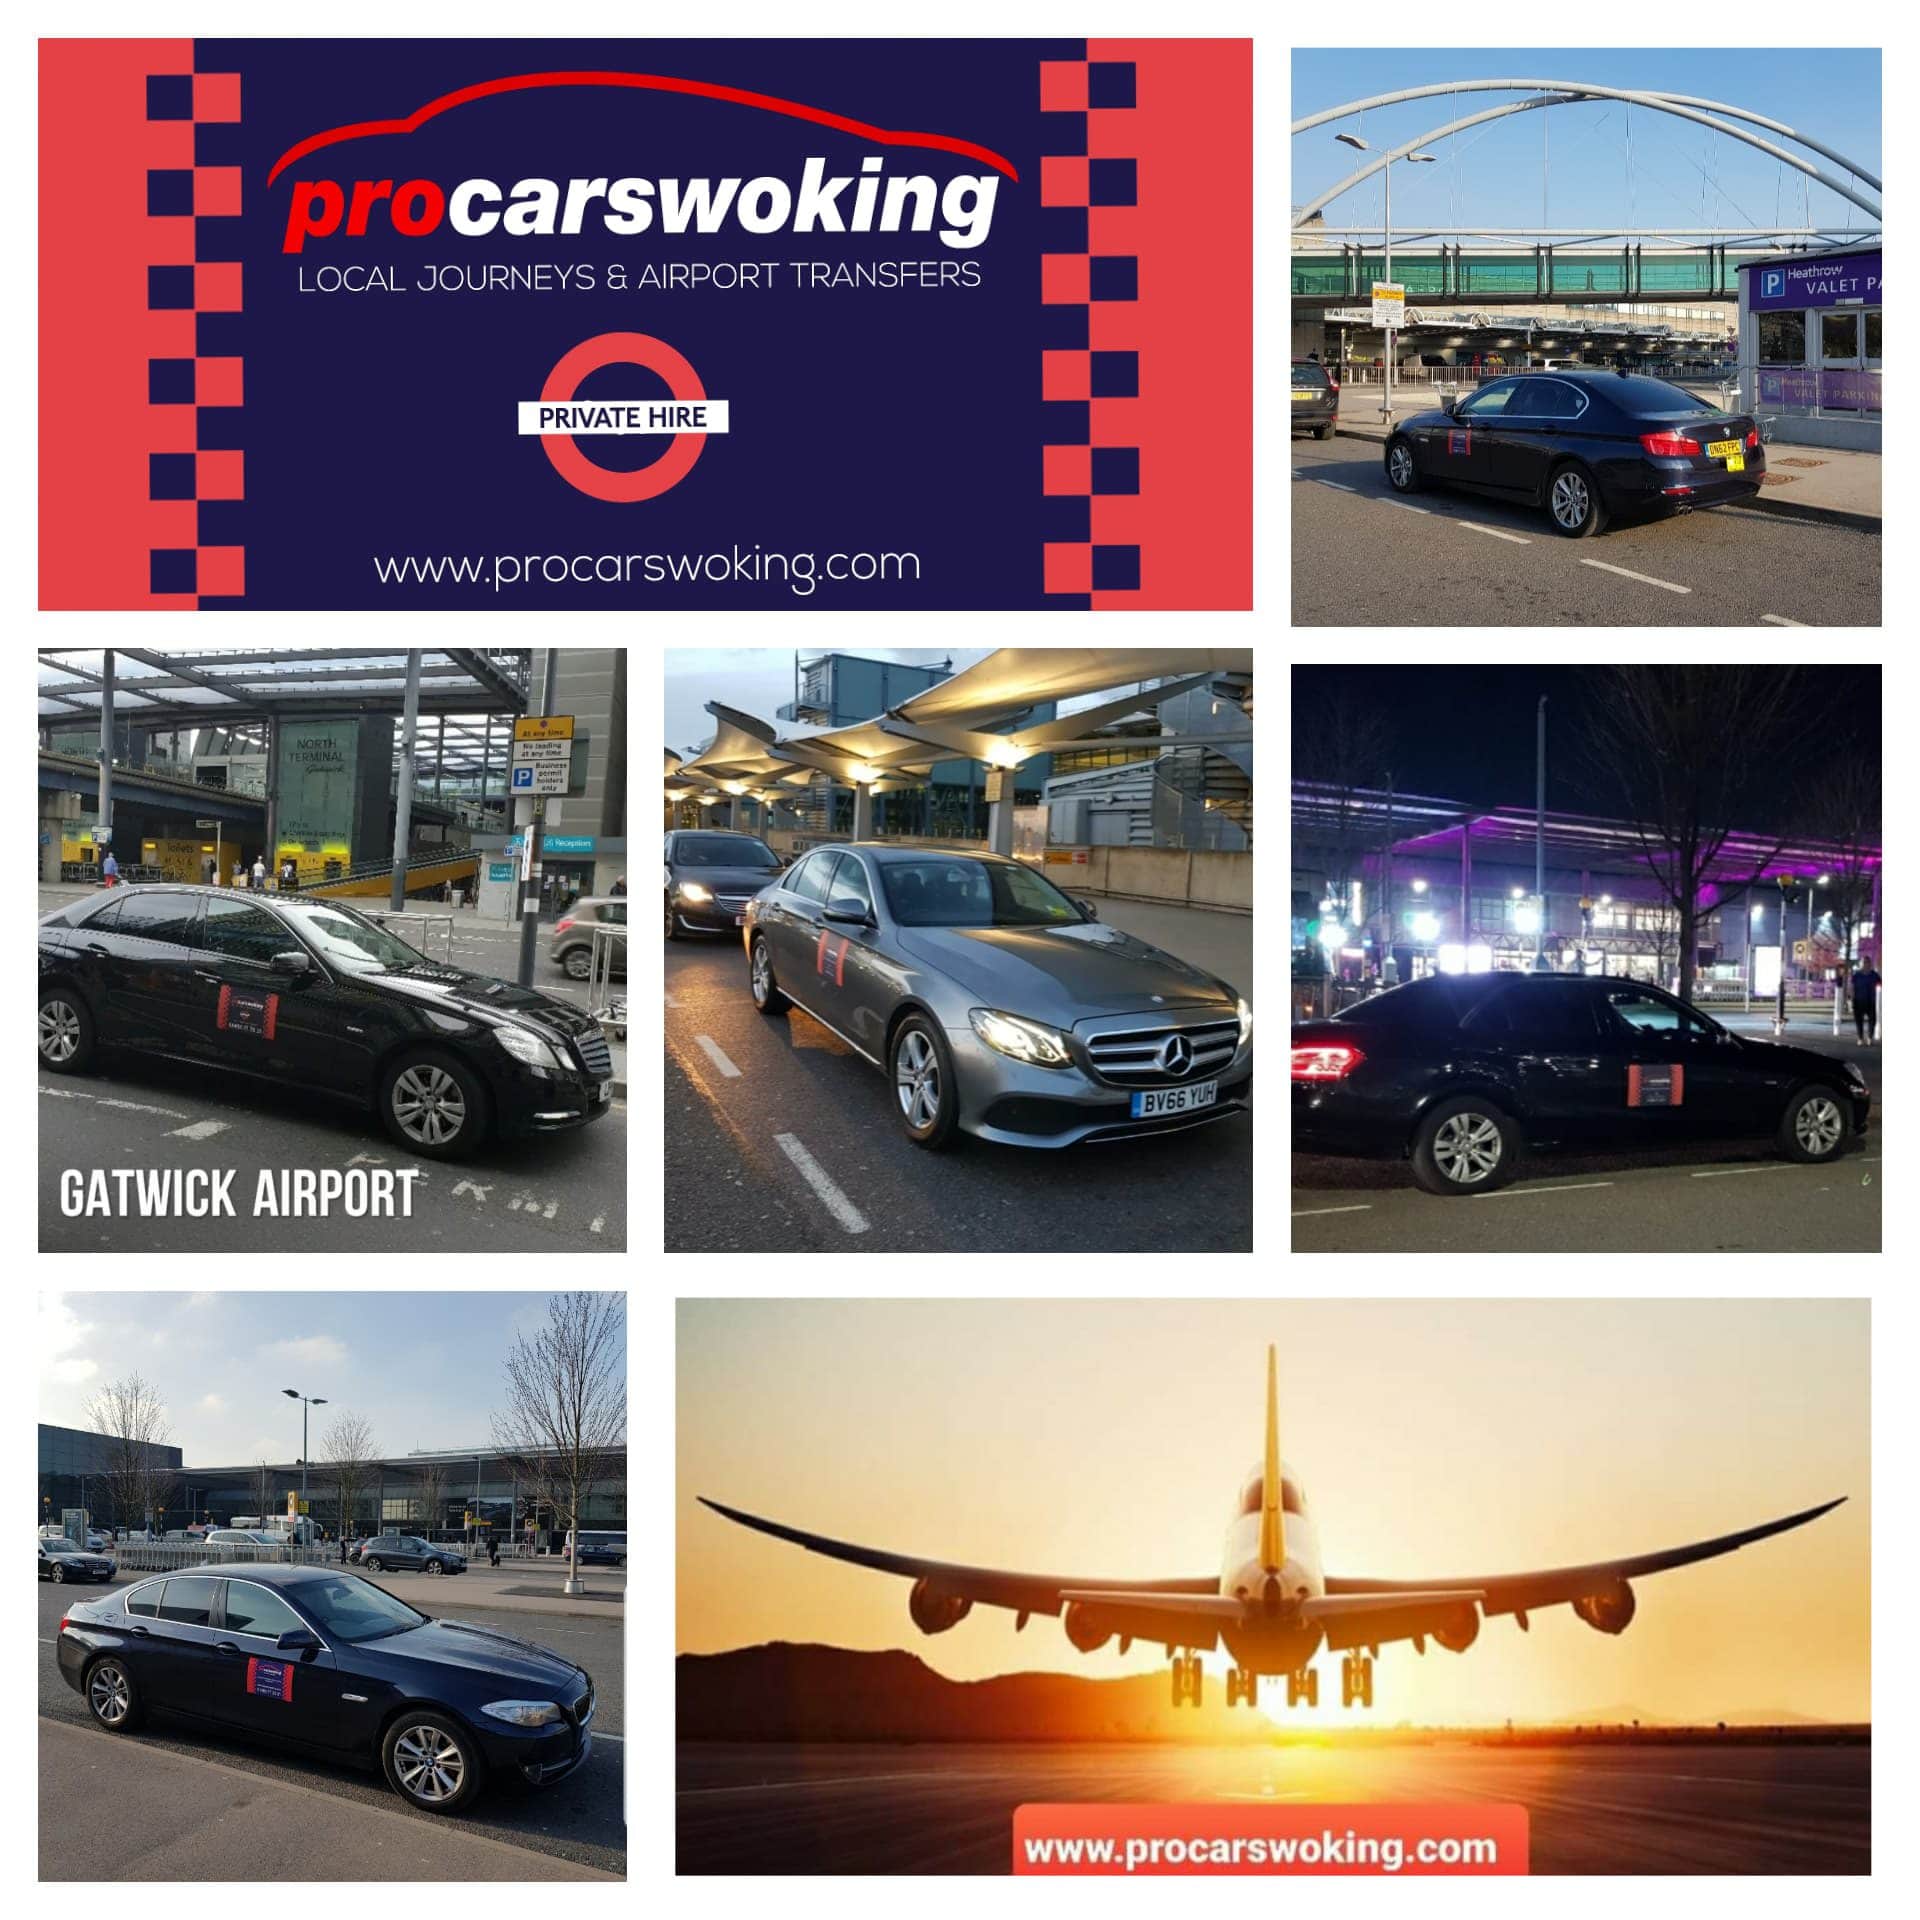 Woking Airport Taxi - Pro Cars Woking